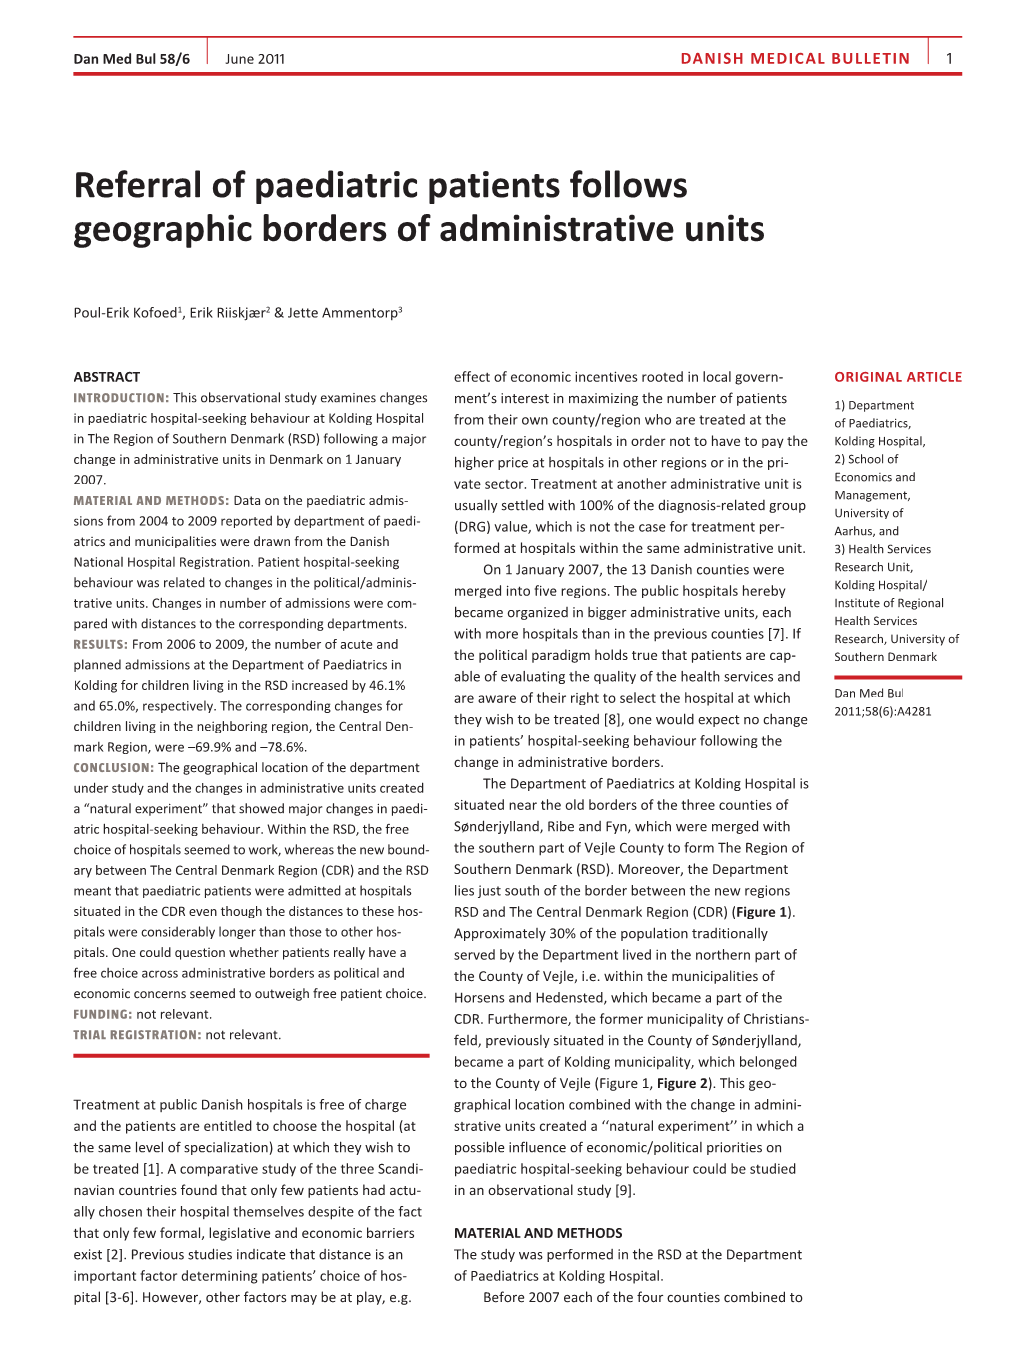 Referral of Paediatric Patients Follows Geographic Borders of Administrative Units